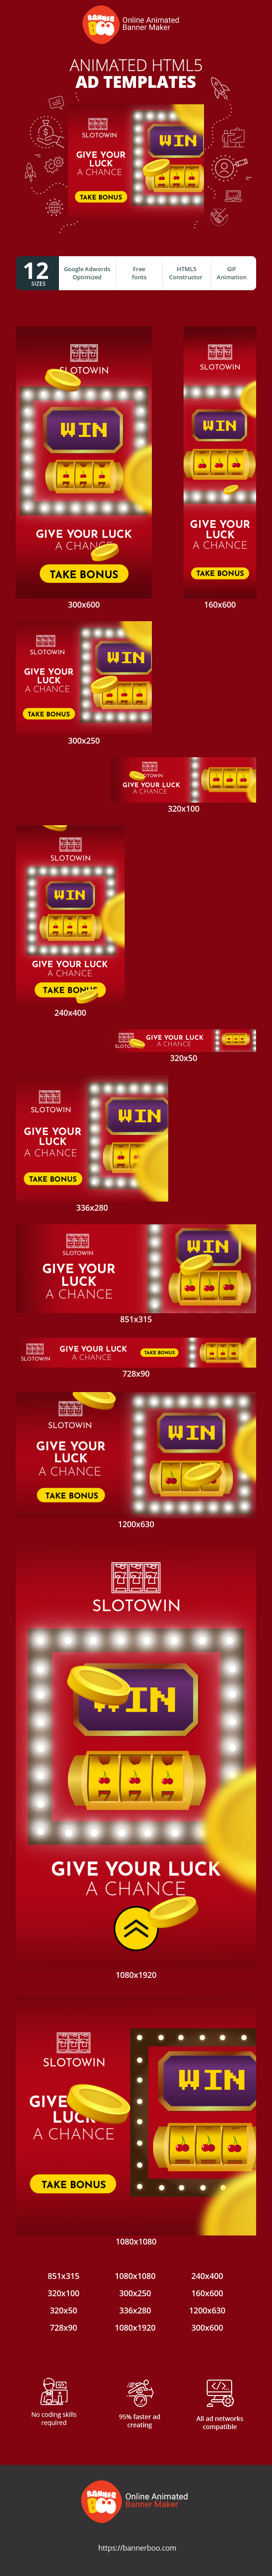 Banner ad template — Give Your Luck A Chance — Gambling